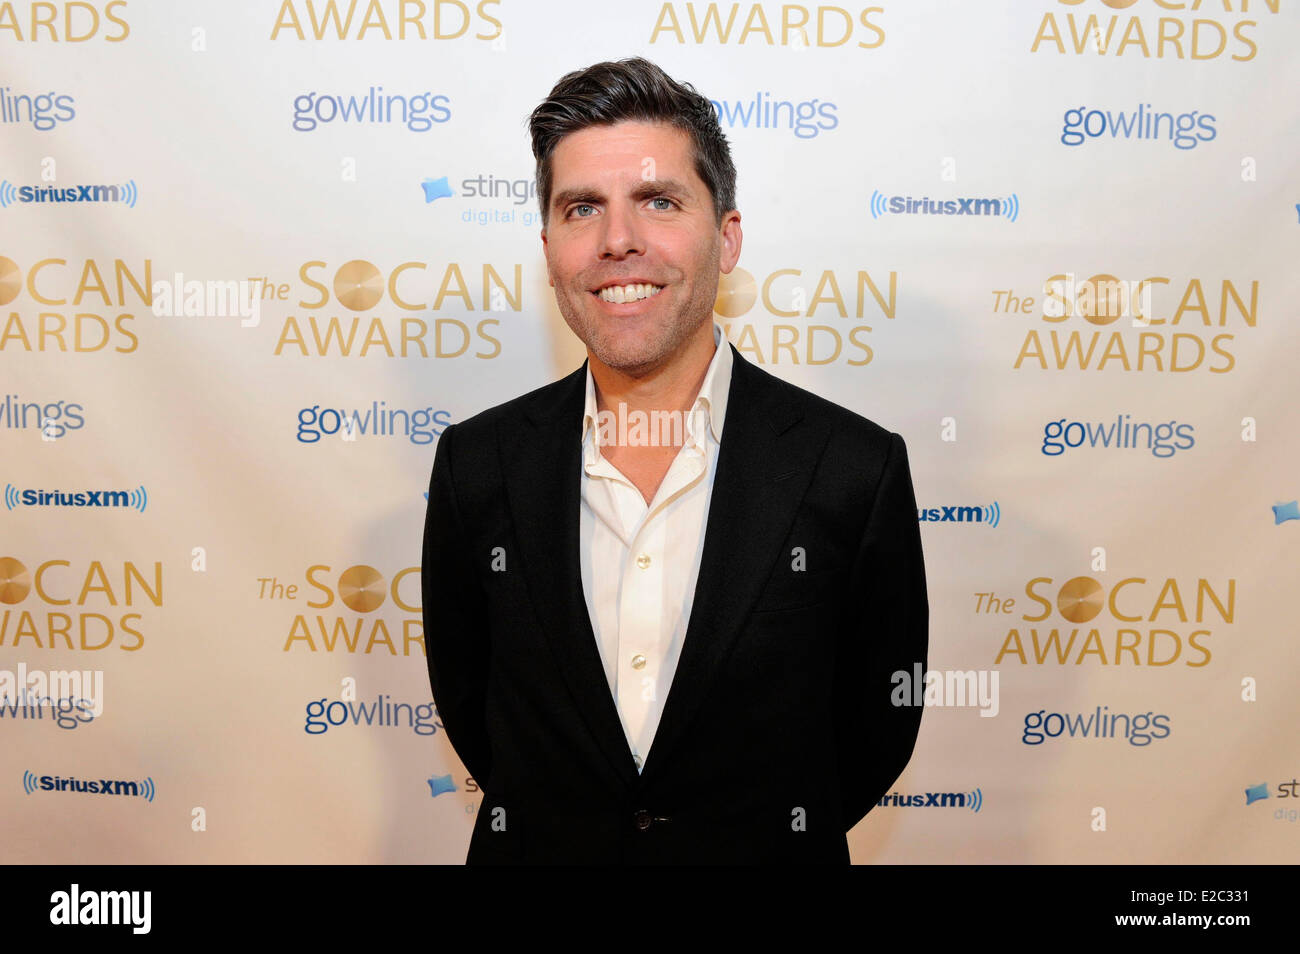 Blain Morris poses for photo at the 25th SOCAN Awards (Society of Composers, Authors and Music Publishers of Canada). Stock Photo